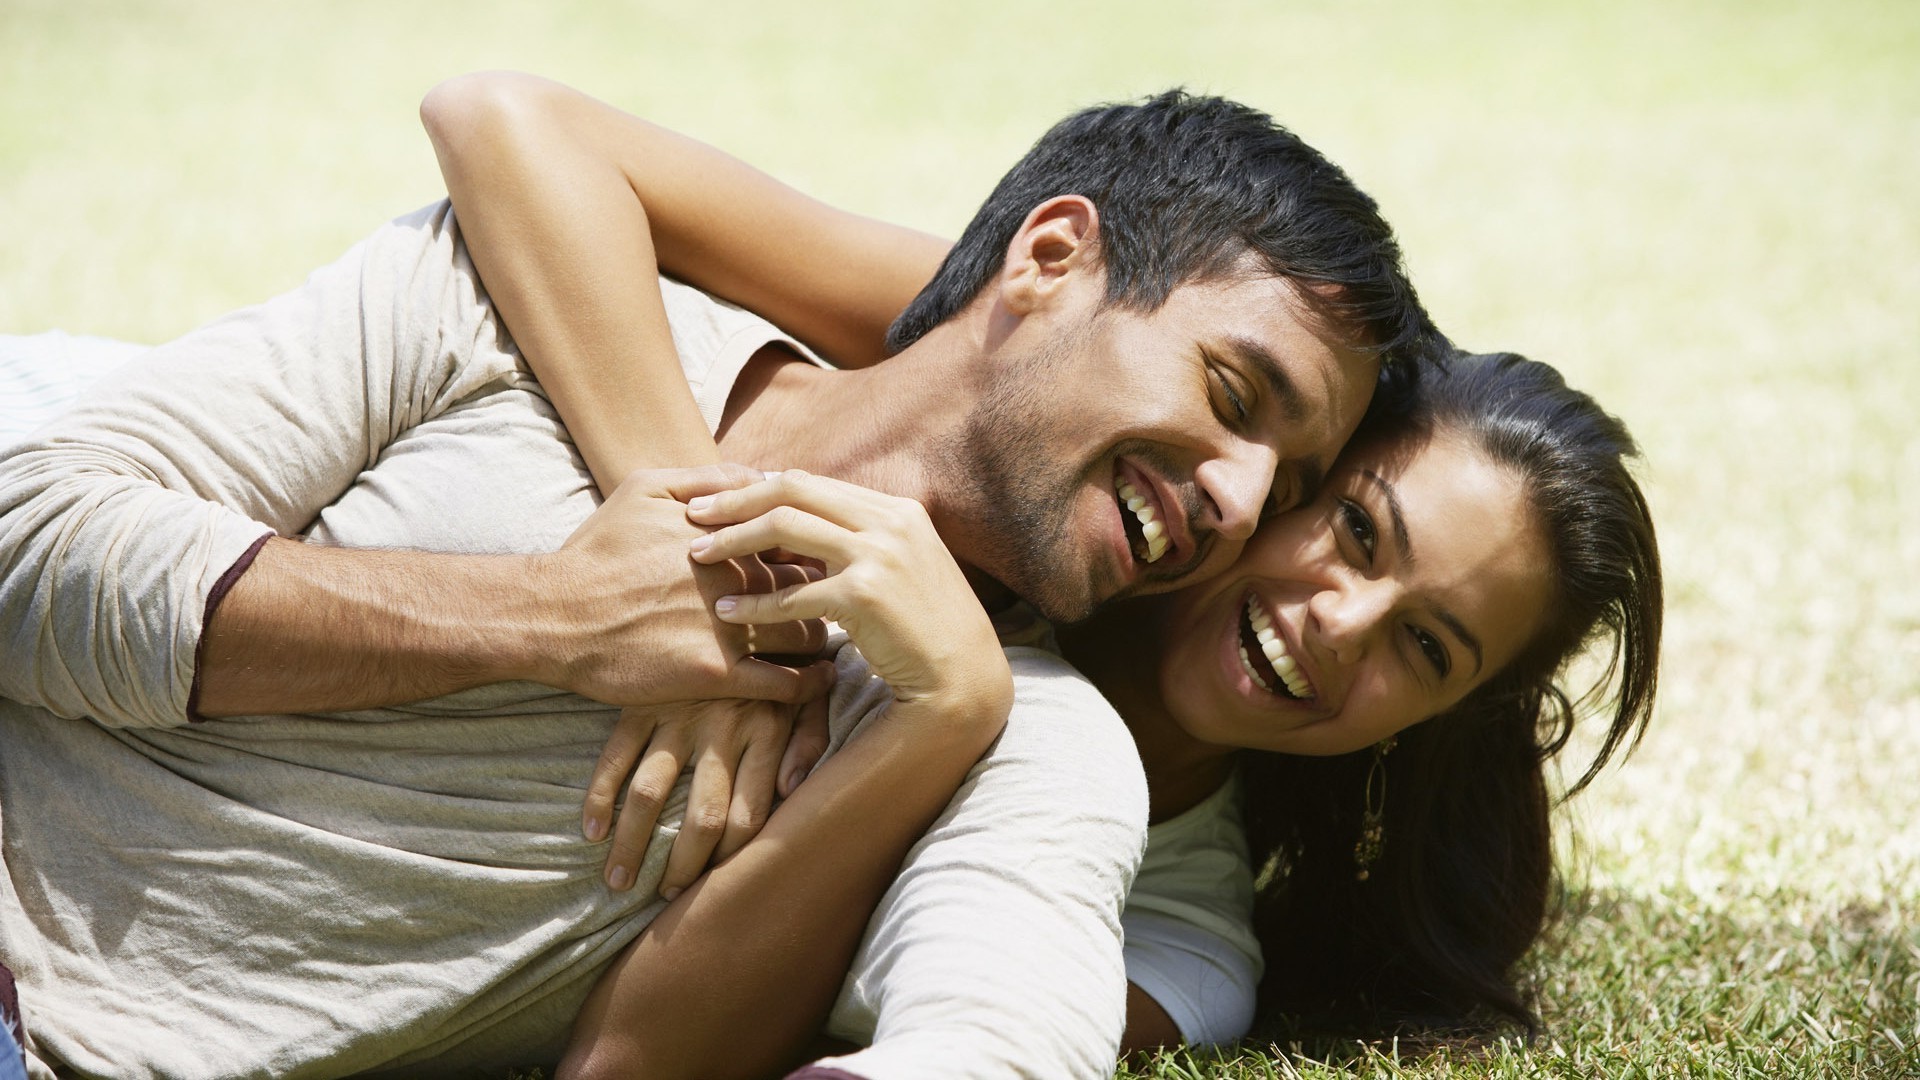 couples woman relaxation outdoors leisure togetherness affection love man reclining facial expression embrace adult happiness enjoyment two daylight romance